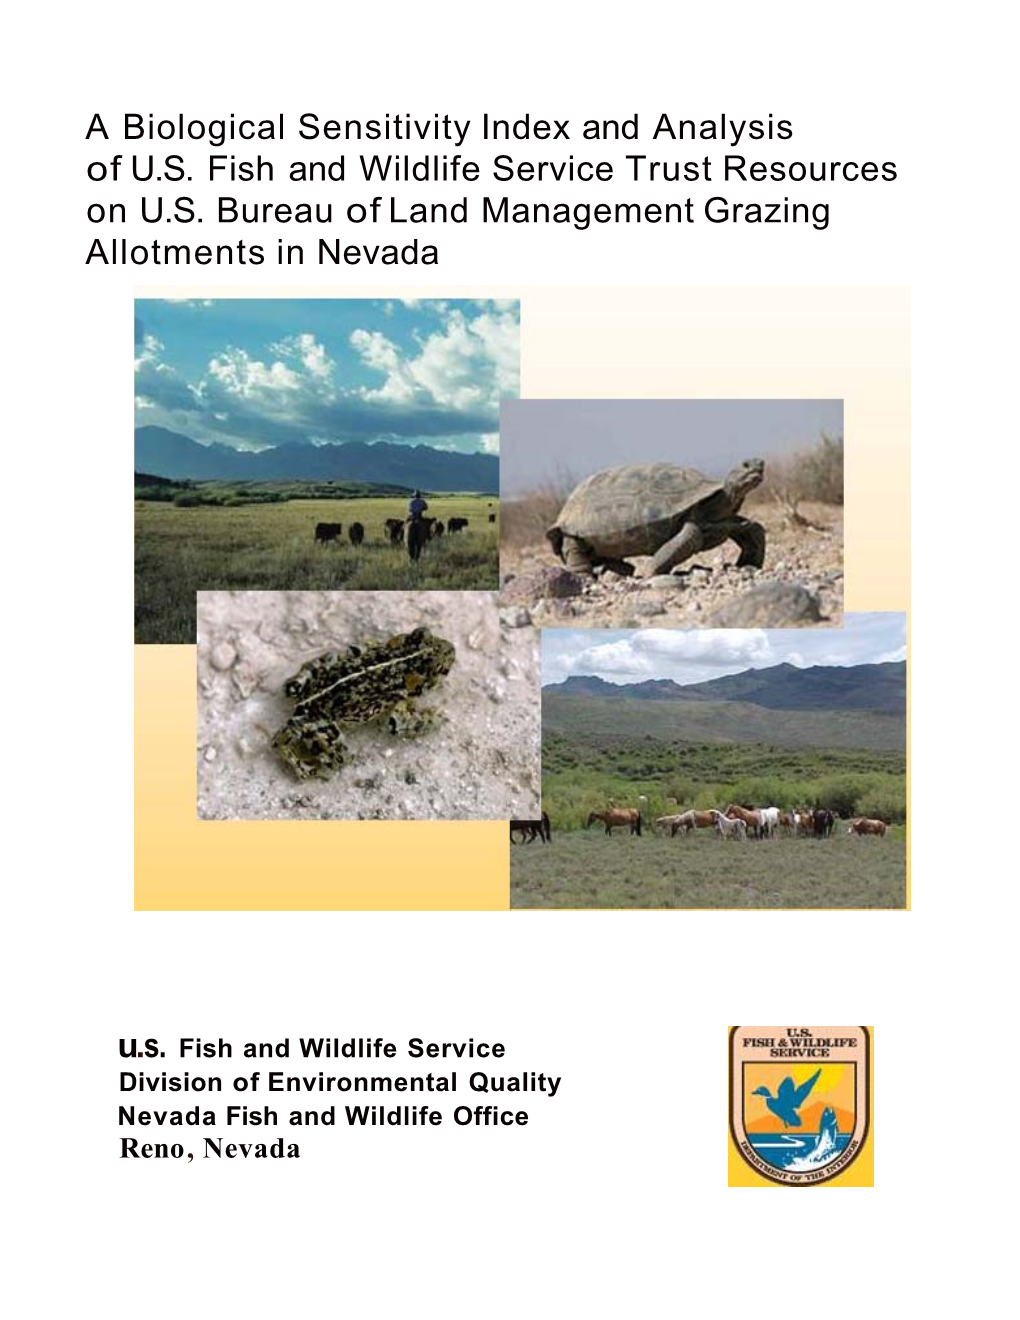 A Biological Sensitivity Index and Analysis of U.S. Fish and Wildlife Service Trust Resources on U.S